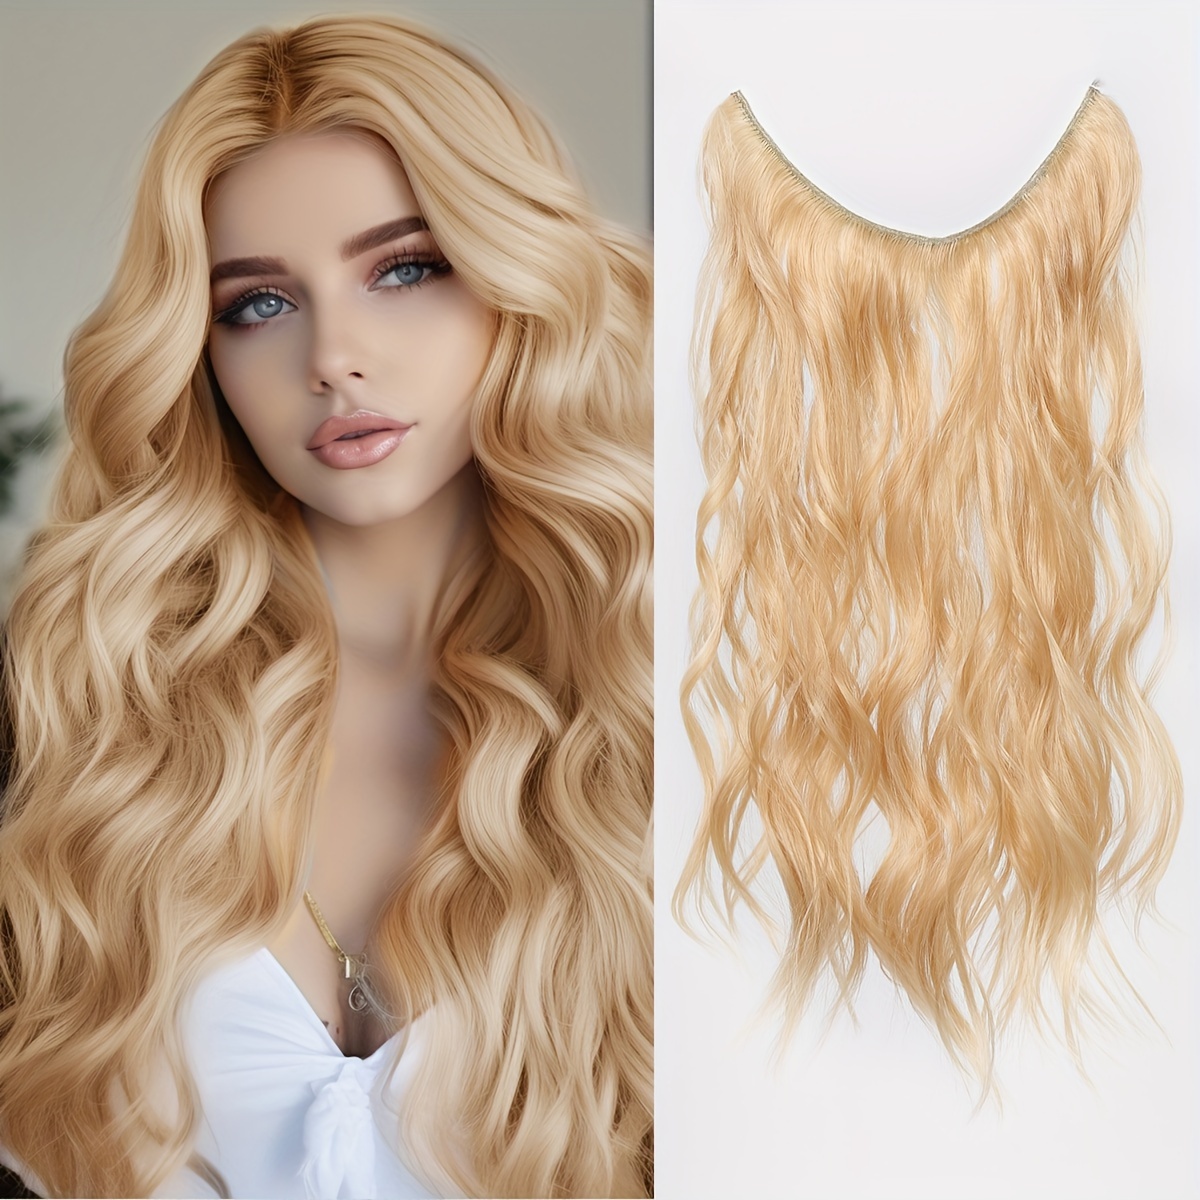  YLSZHY Acrylic Hair Extension Holder,Transparent Wig